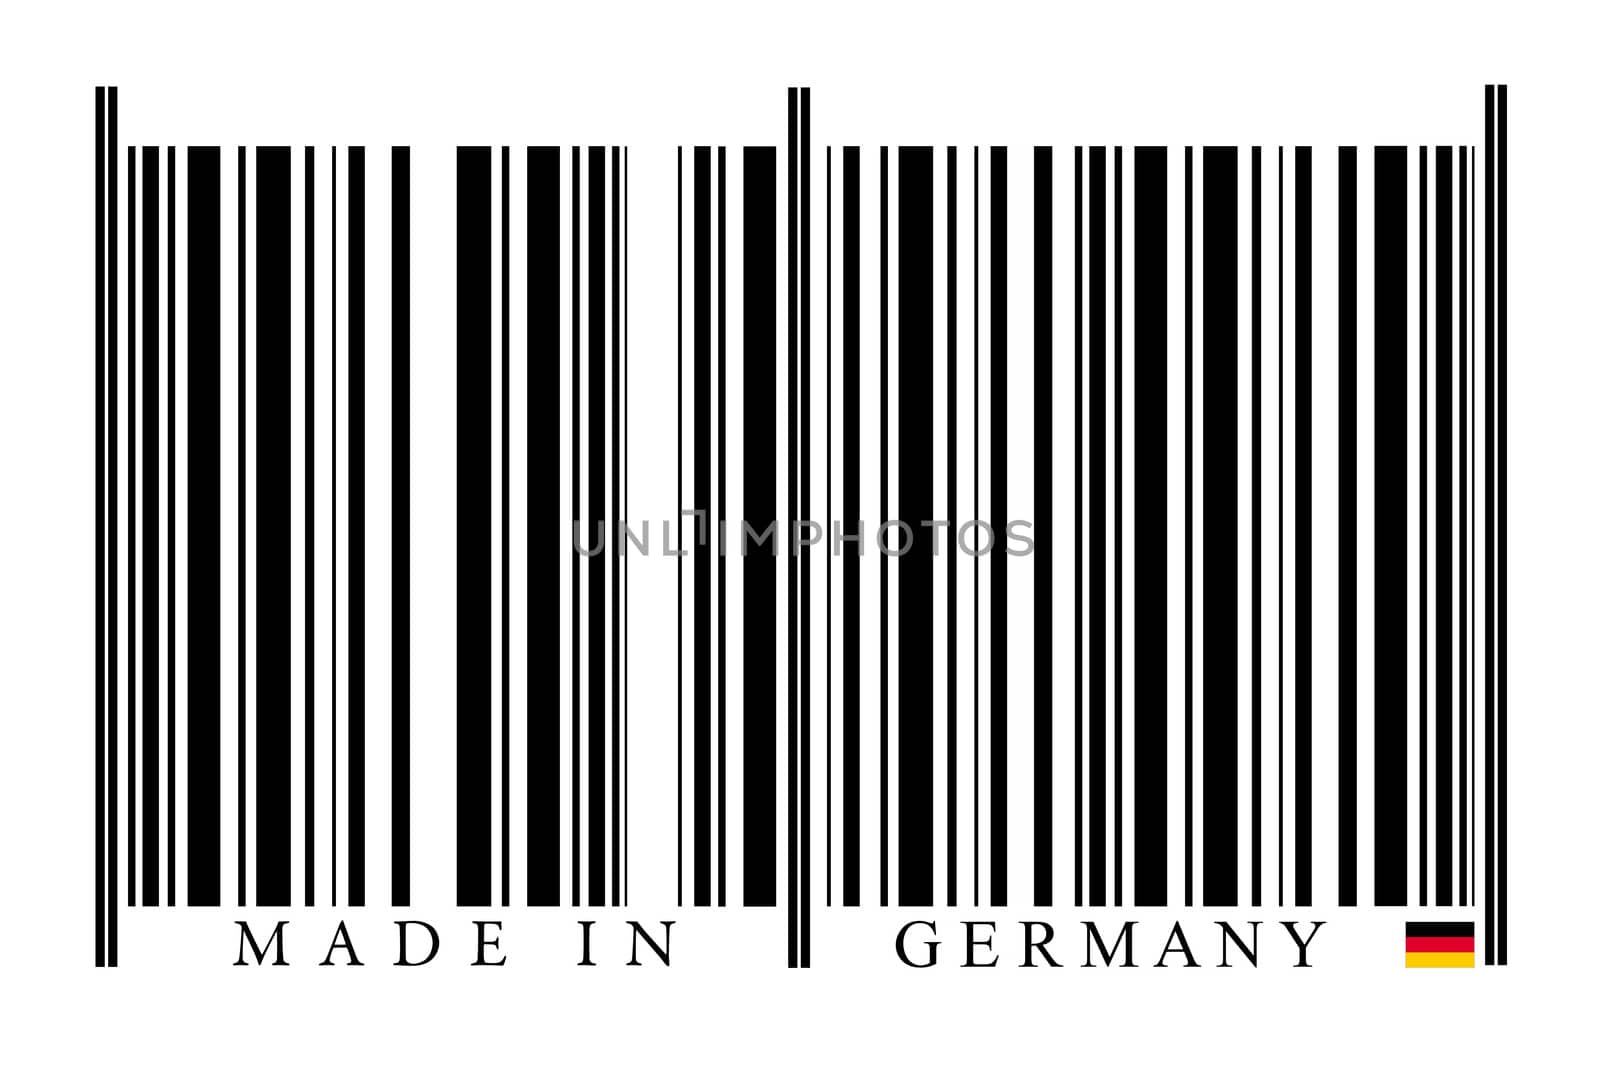 Germany Barcode on white background